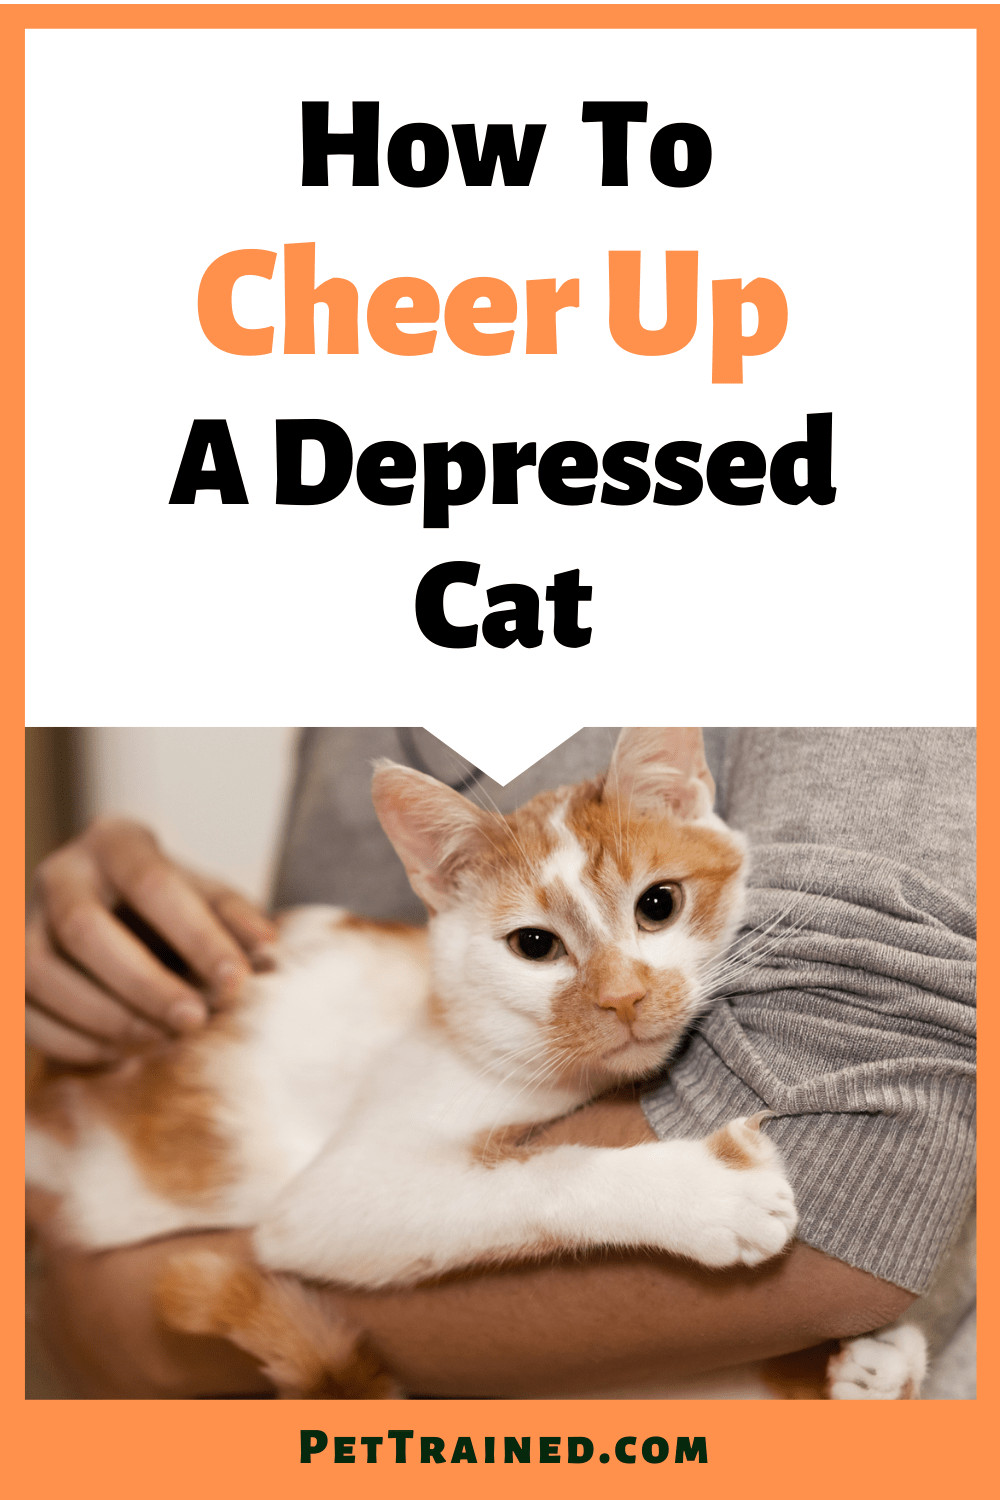 How to make a depressed cat happy